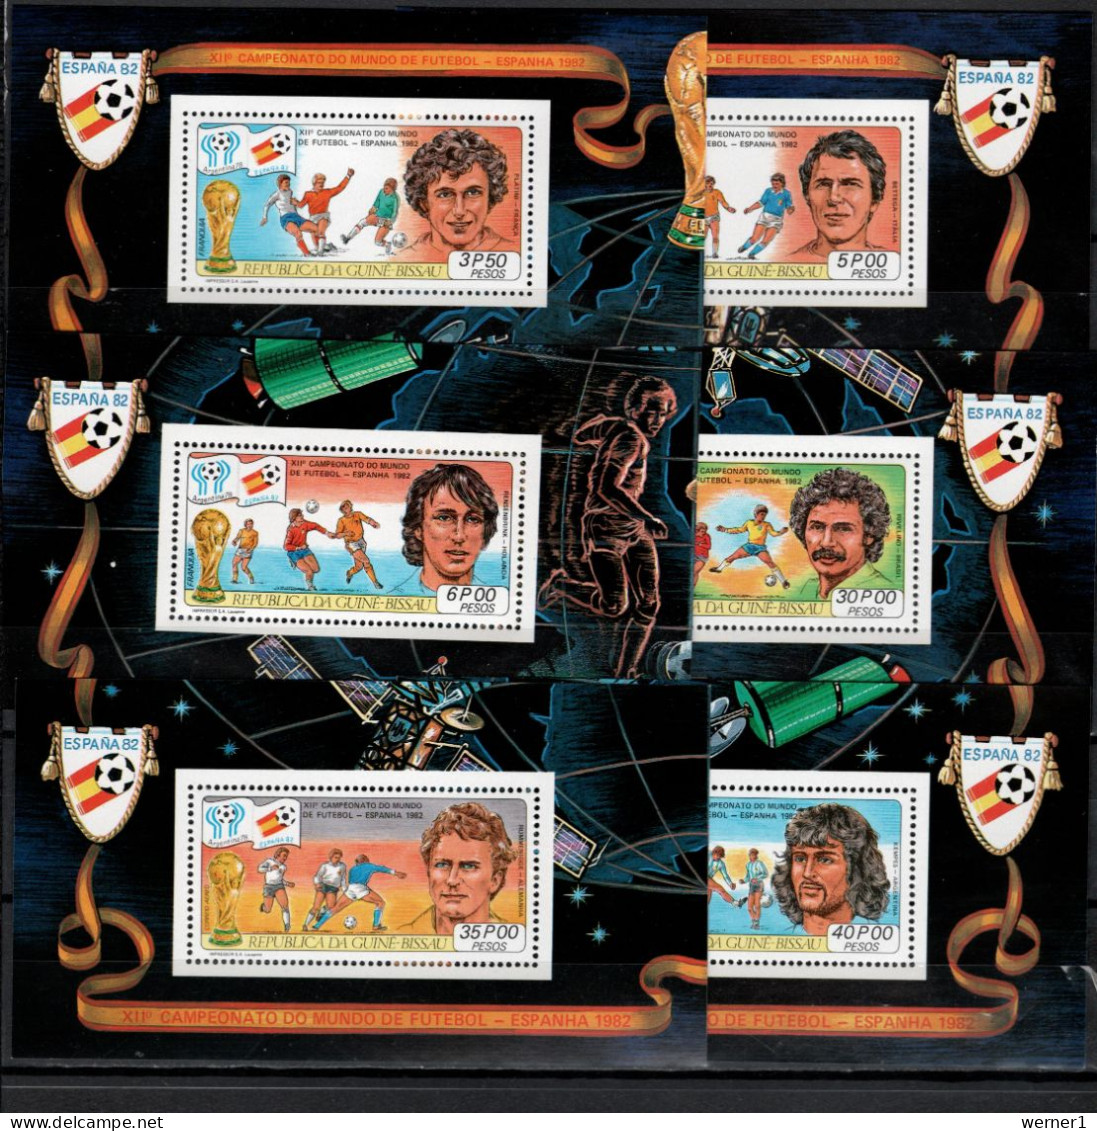 Guinea - Bissau 1981 Football Soccer World Cup, Space Set Of 6 S/s MNH -scarce- - 1982 – Spain